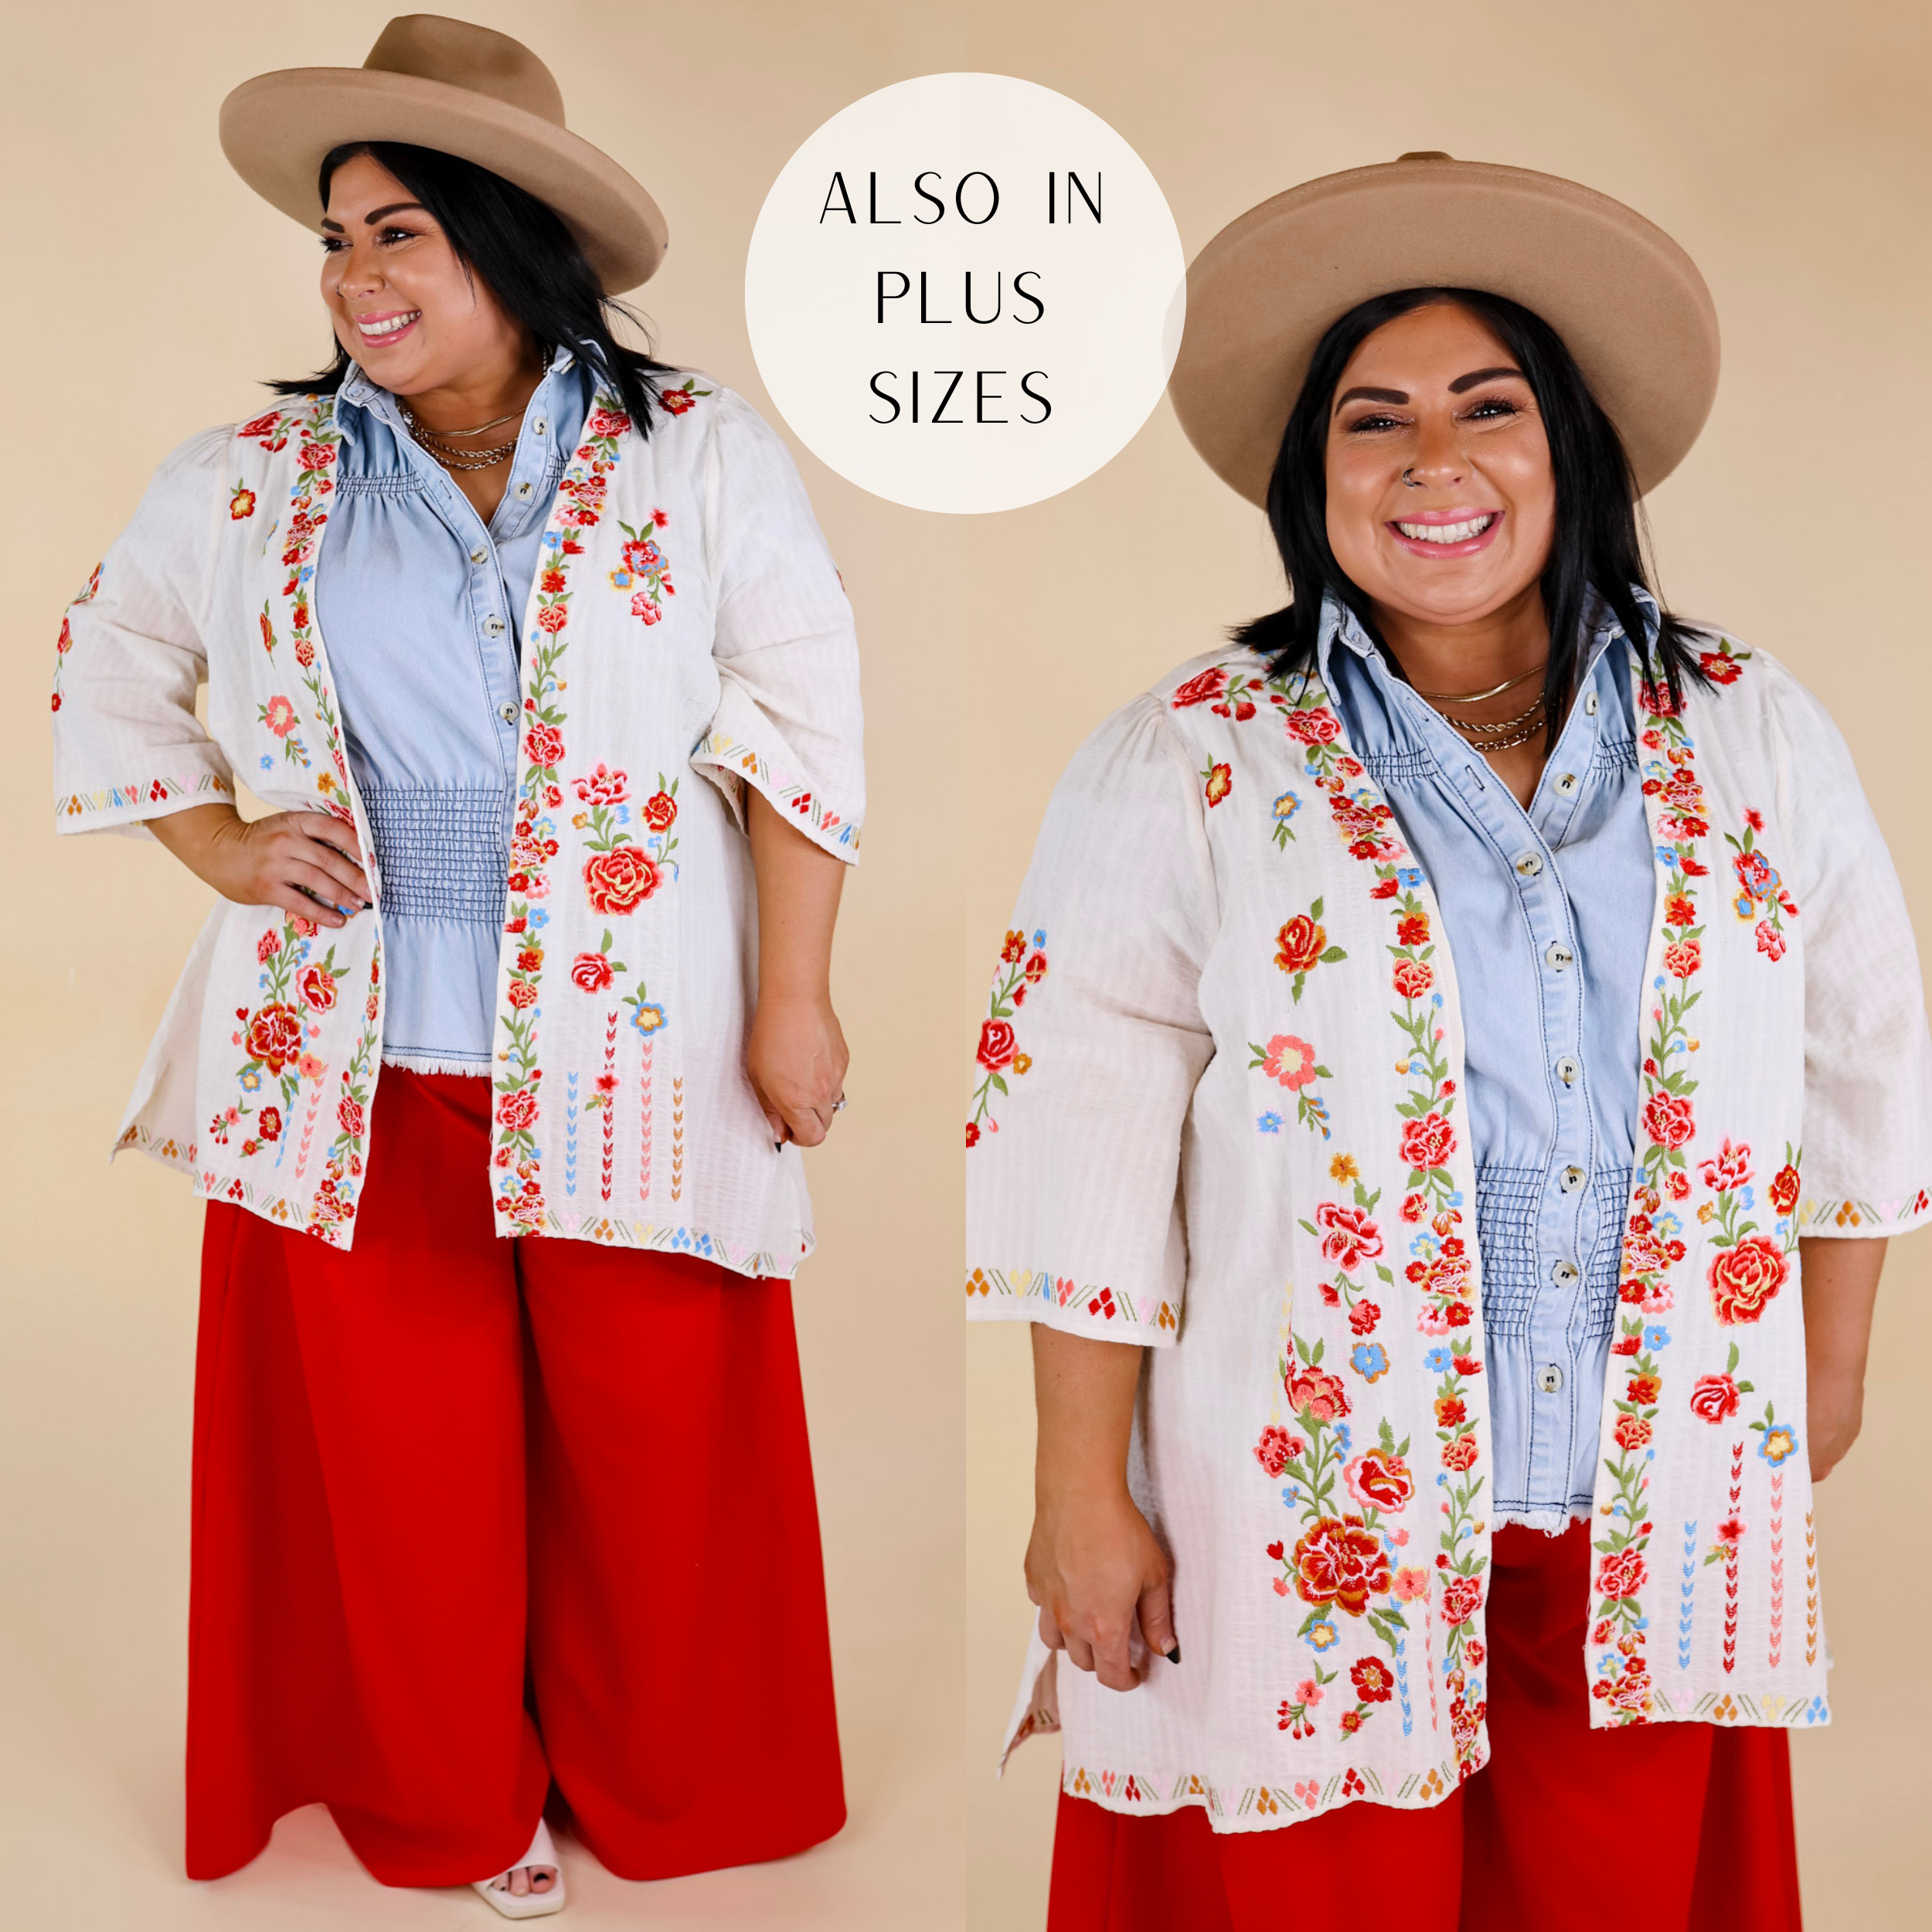 Model is wearing a floral embroidered ivory kimono with wide half sleeves. Model has this kimono on over a denim button up top, red pants, and a brown hat.